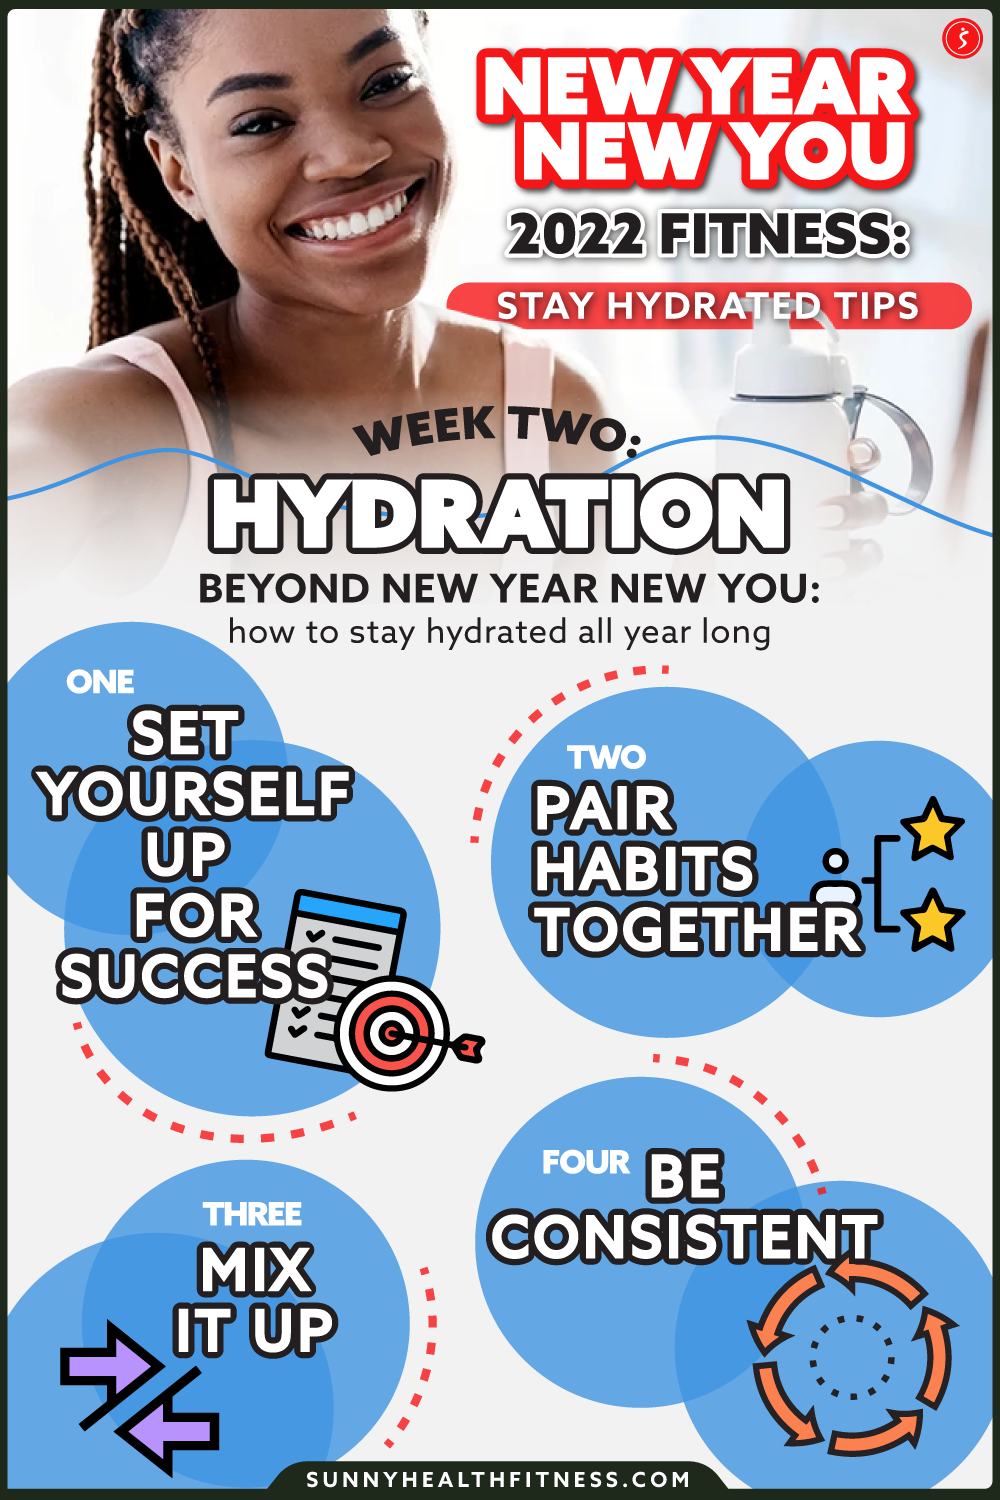 https://cdn.shopify.com/s/files/1/0052/7043/7978/t/90/assets/20220110-Sunny-Health-Fitness-blogs-fitness-programs-new-year-new-you-2022-stay-hydrated-tips_21.png